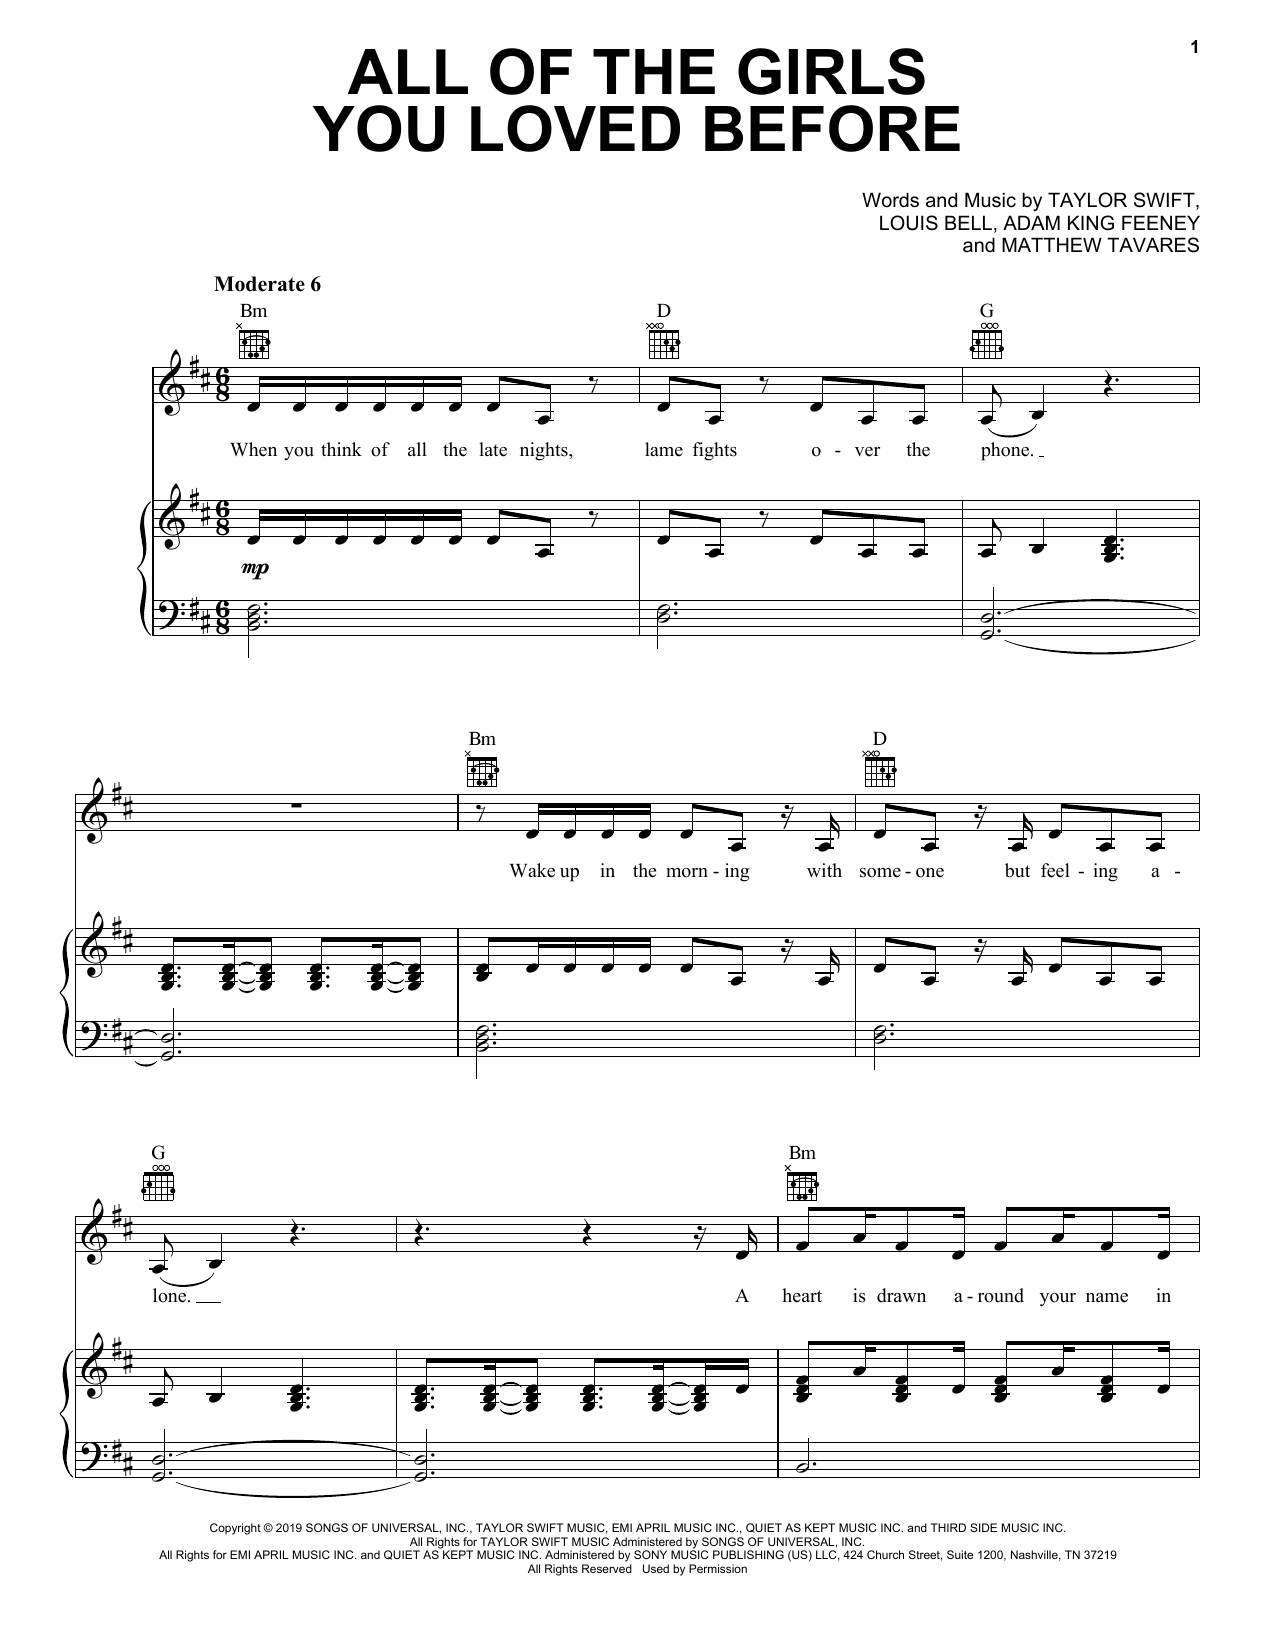 Taylor Swift All Of The Girls You Loved Before sheet music notes printable PDF score